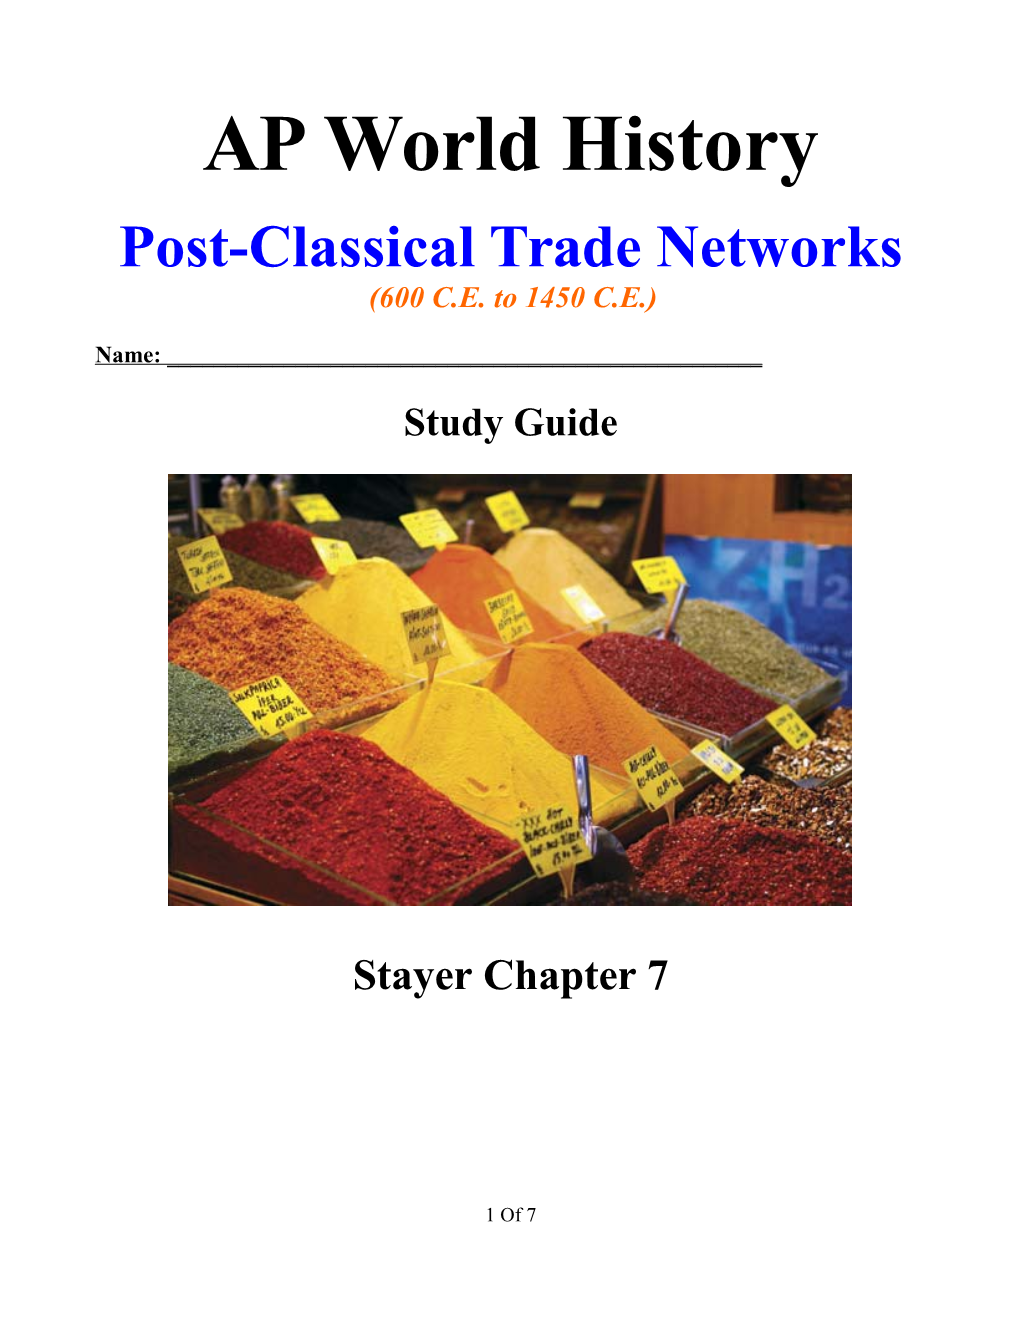 Post-Classical Trade Networks